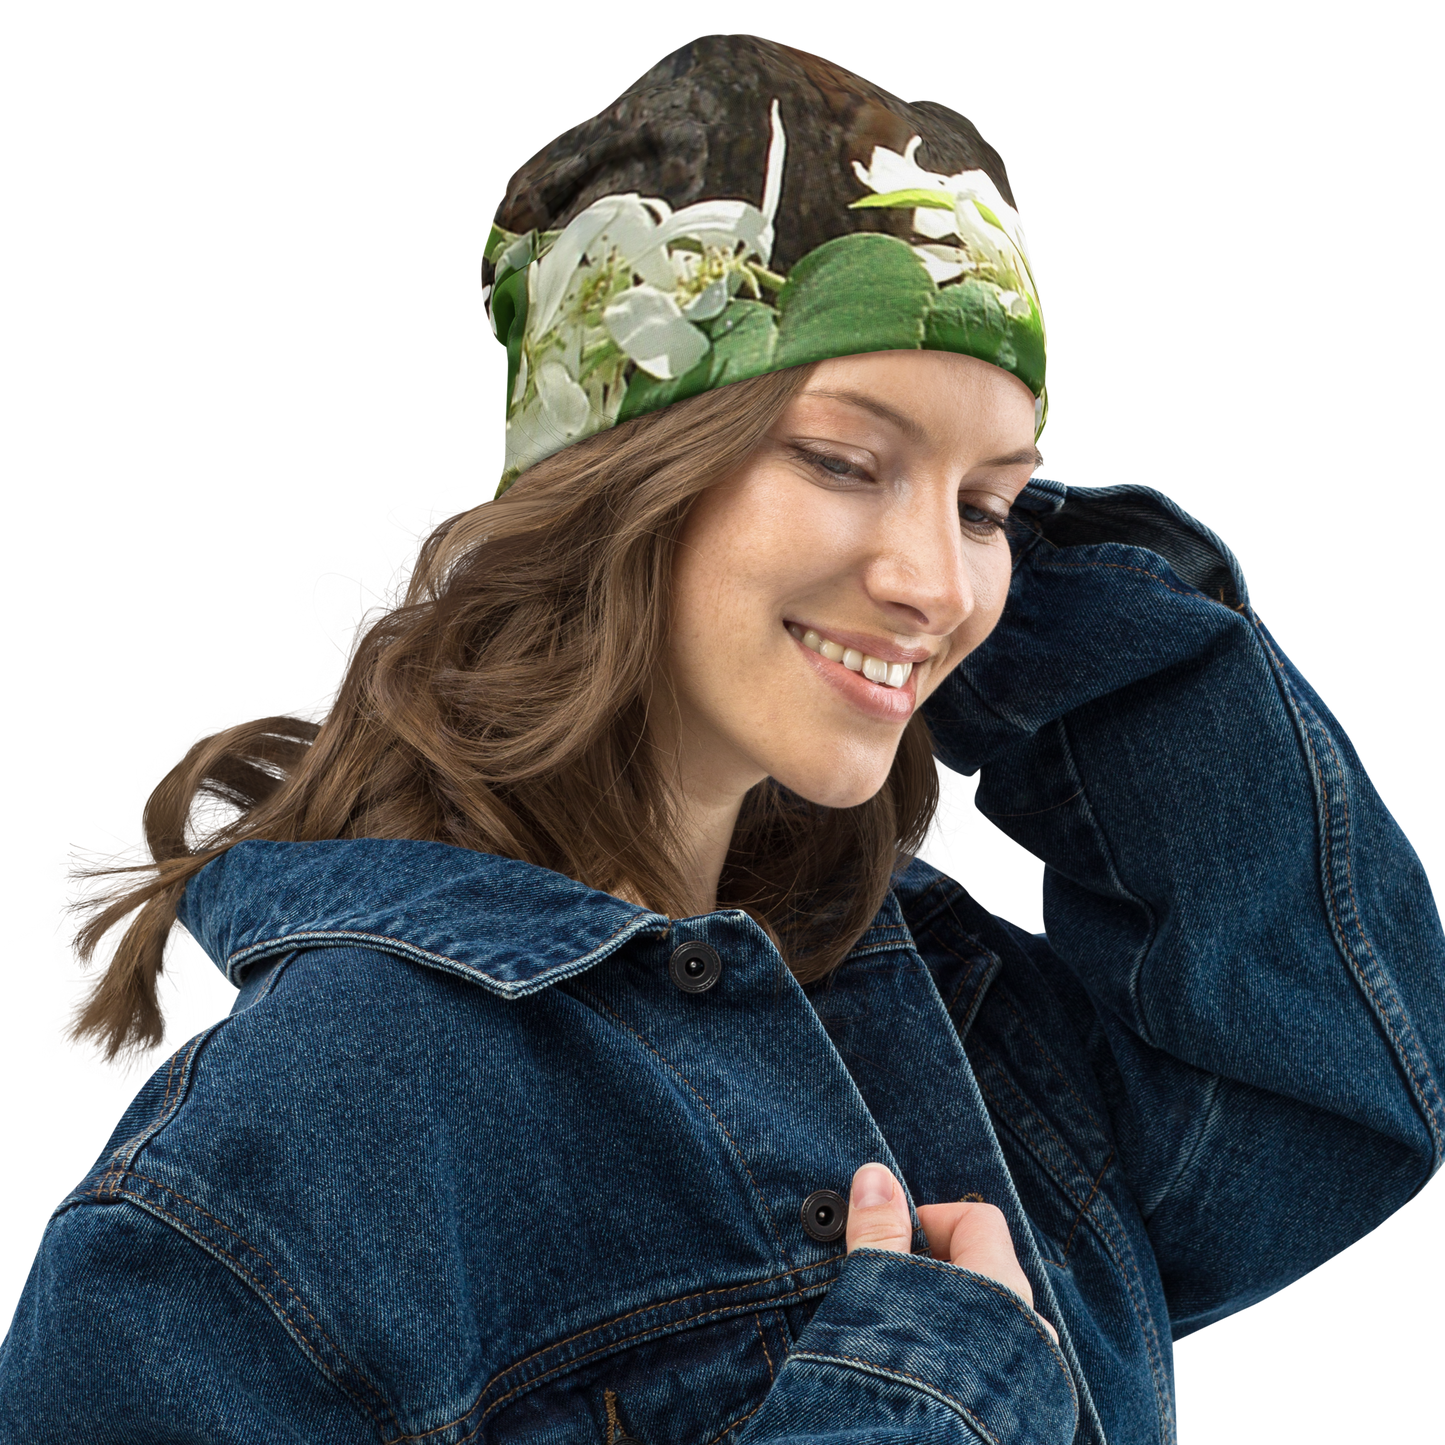 The EARTH LOVE Collection - "Bark & Blossom Bliss" Design Beanie - Lightweight, Cute Chemo Hat